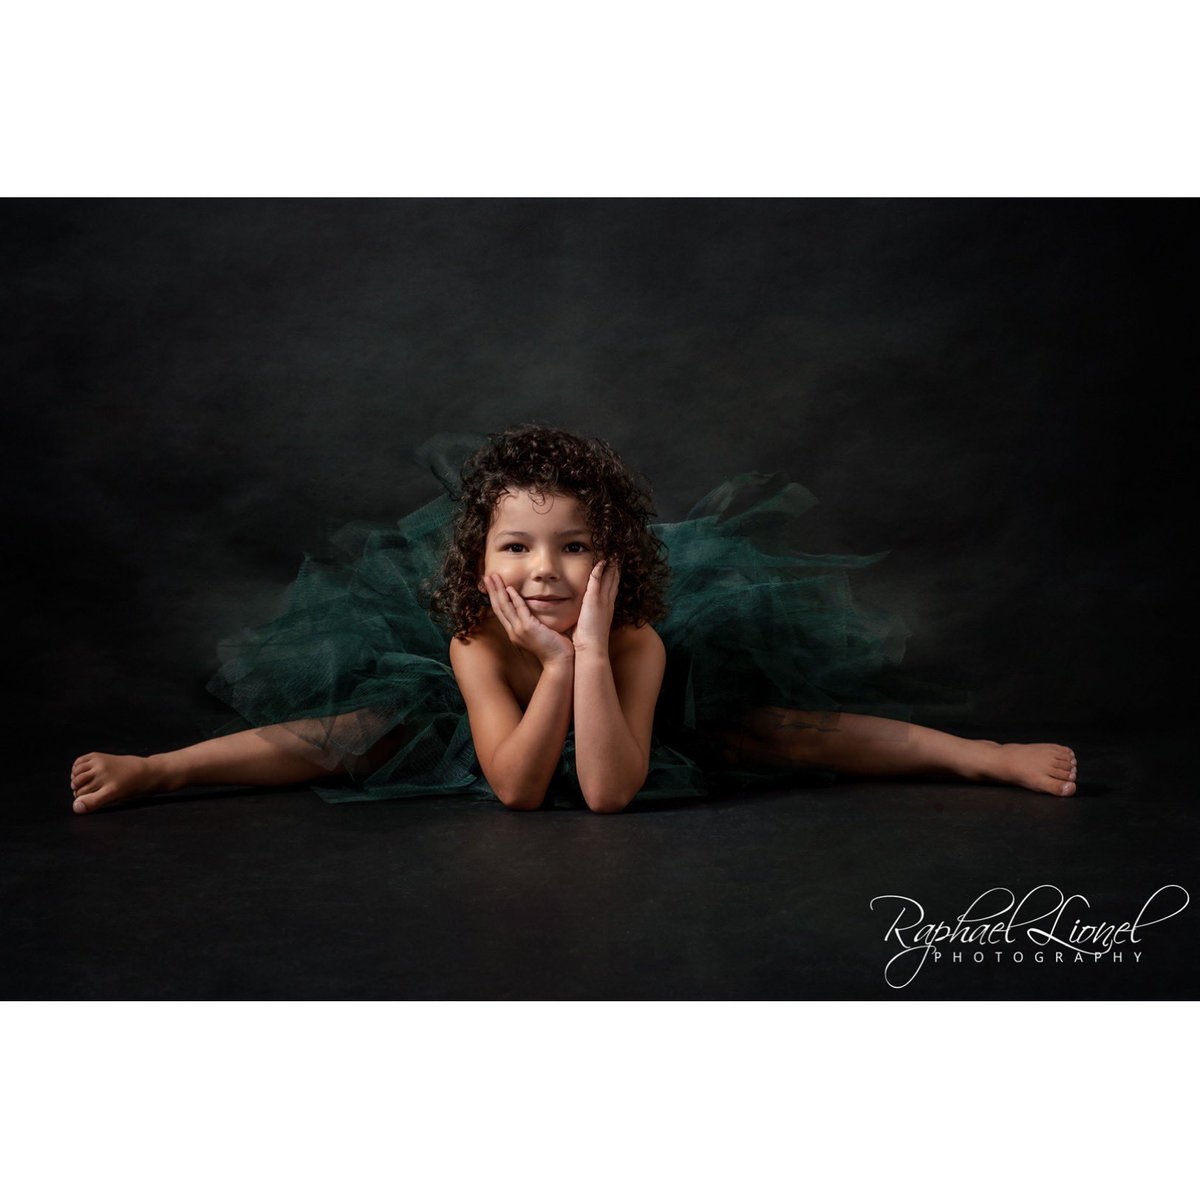 We didnt expect this!  Little Skylar did her own thing here hands and everything!  #familyportraits #familyphotographer #birmingham #portraitphotography #tuledresses #fujifilm_x_series #childportraits #kidsportraits #thisisfamilyportraits #portraitstudio #jqbid #dancer #curlykids